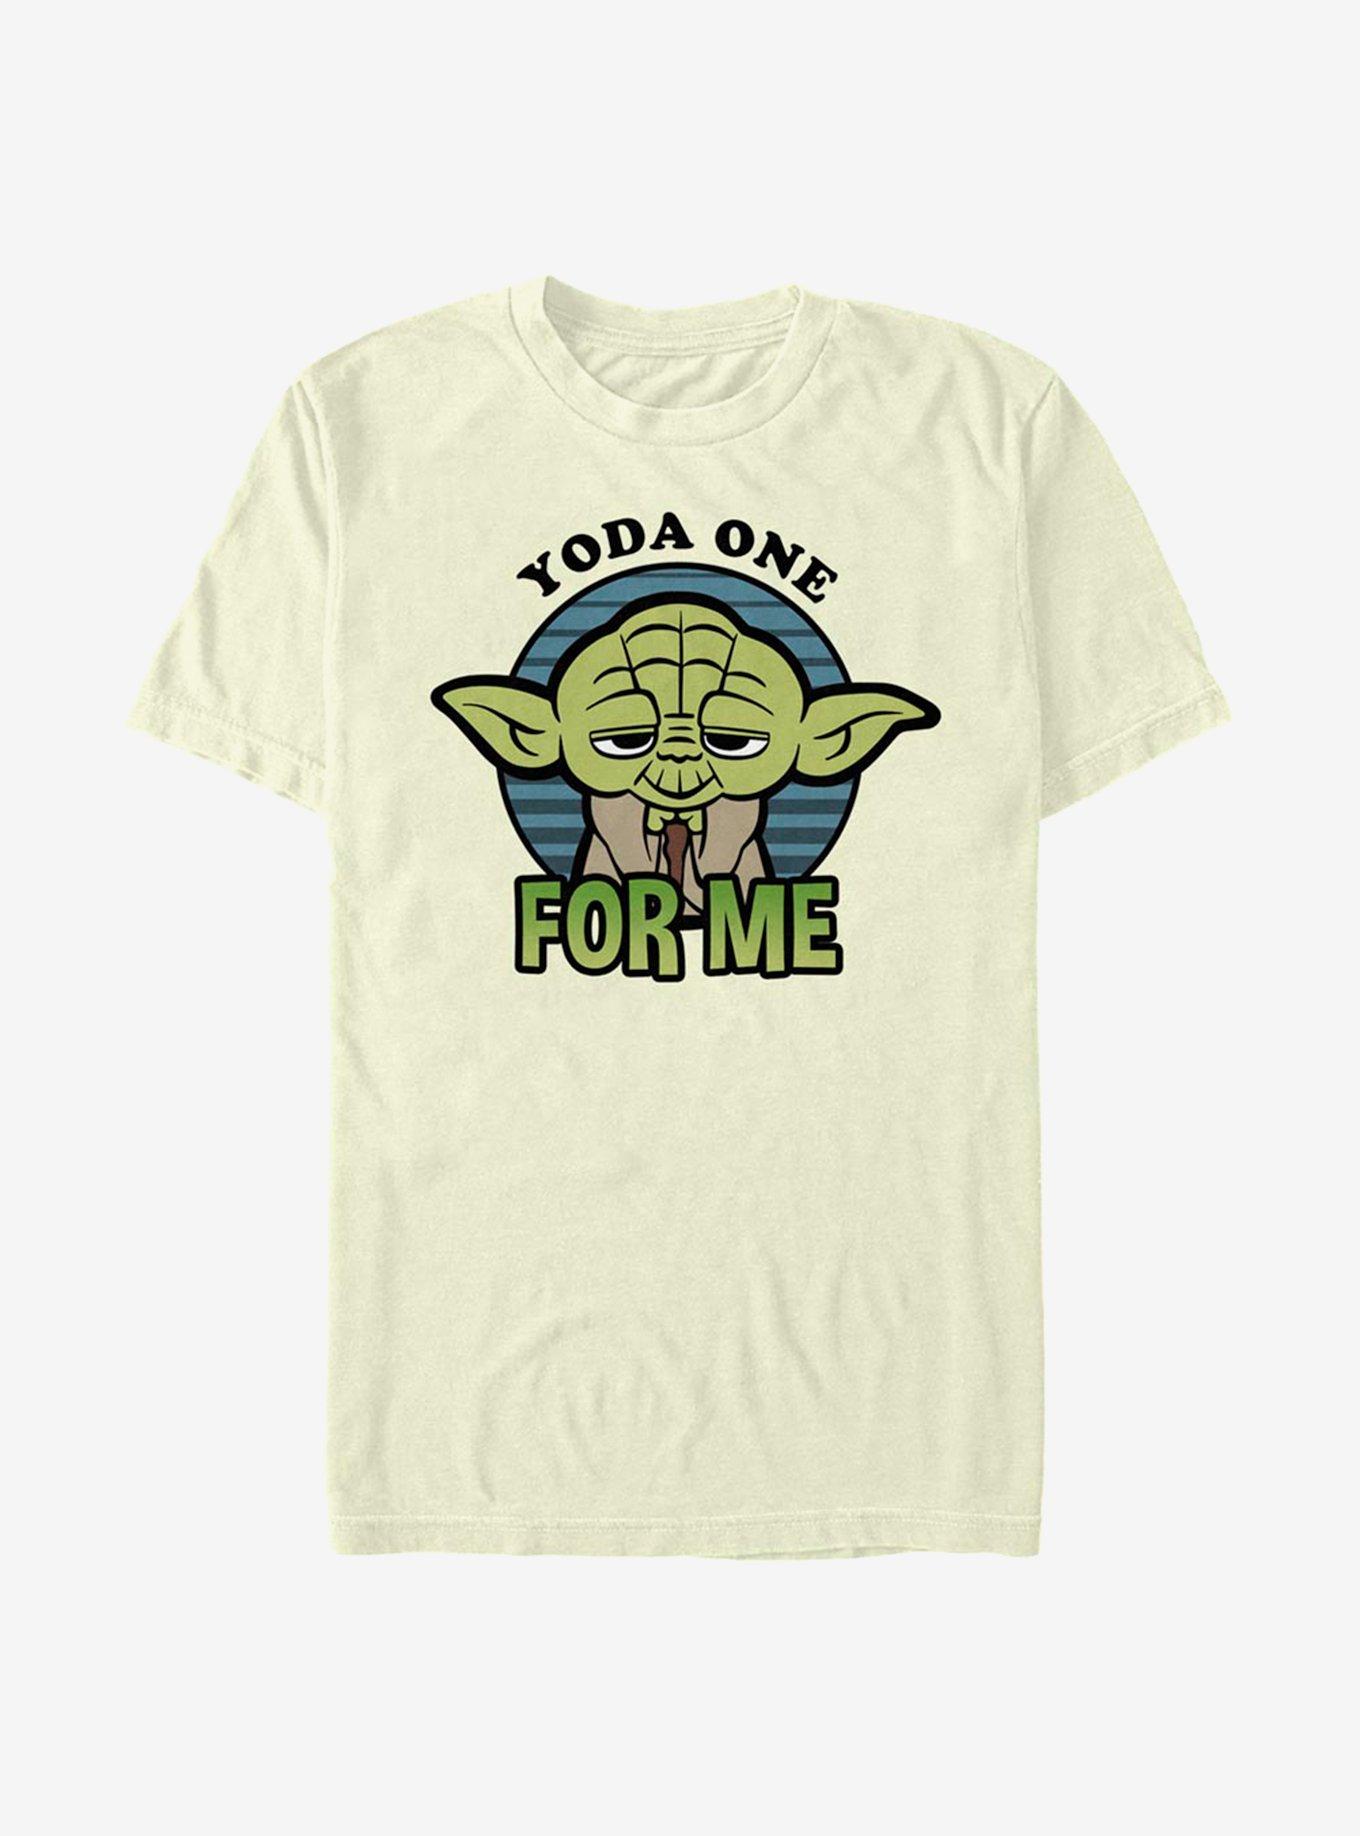 Star Wars Yoda One For Me T-Shirt